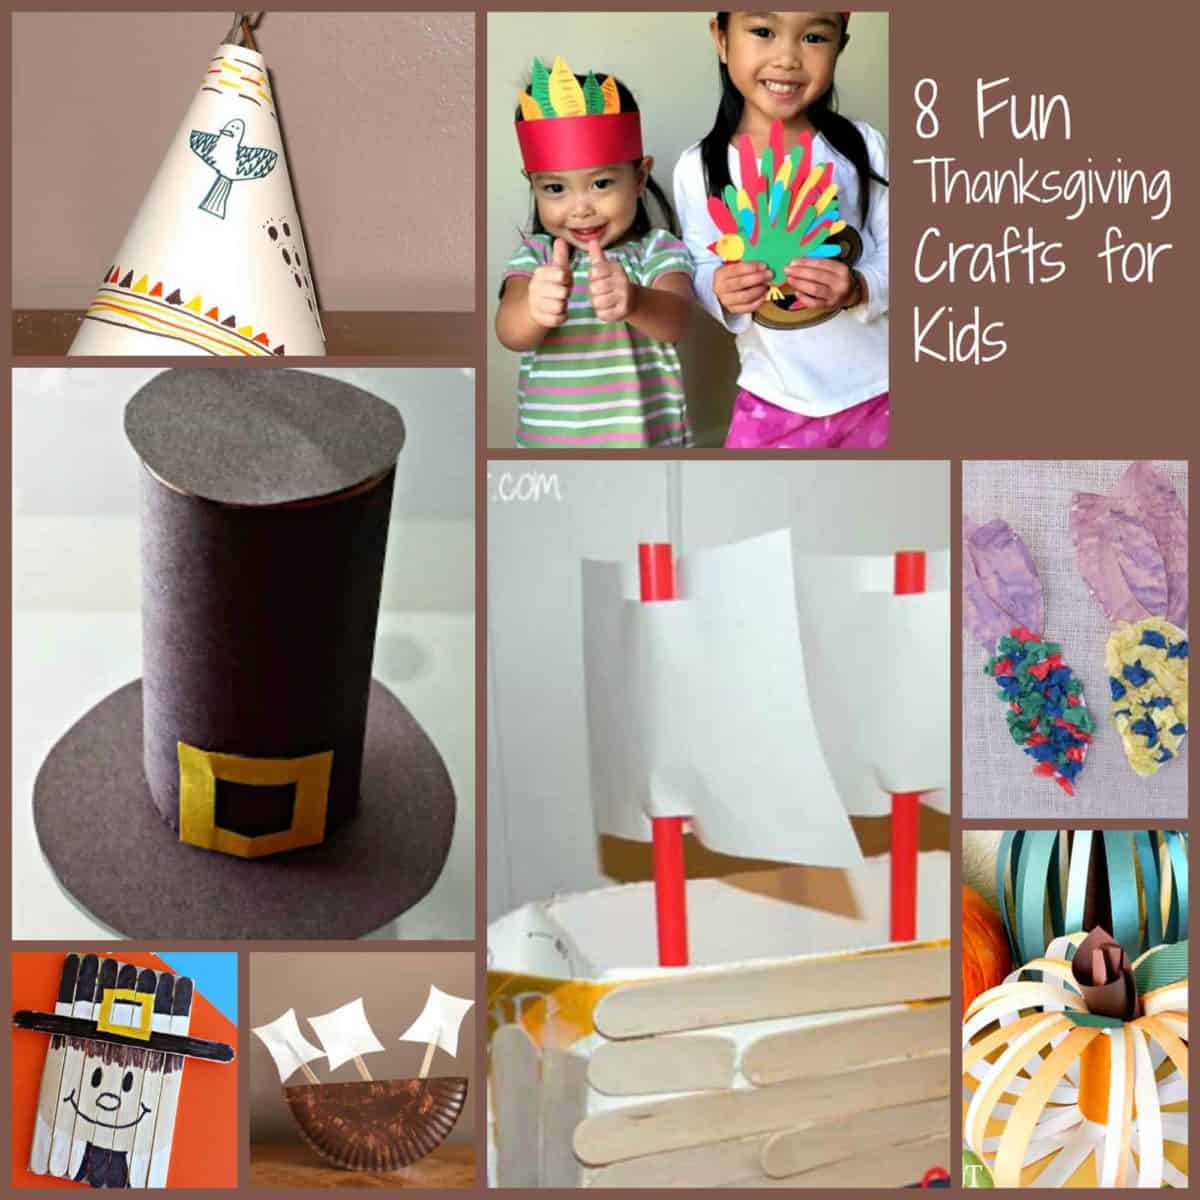 Looking for non-turkey Thanksgiving crafts for kids? We heard your pleas and rounded up 8 adorable ideas! Check them out and getting crafty!